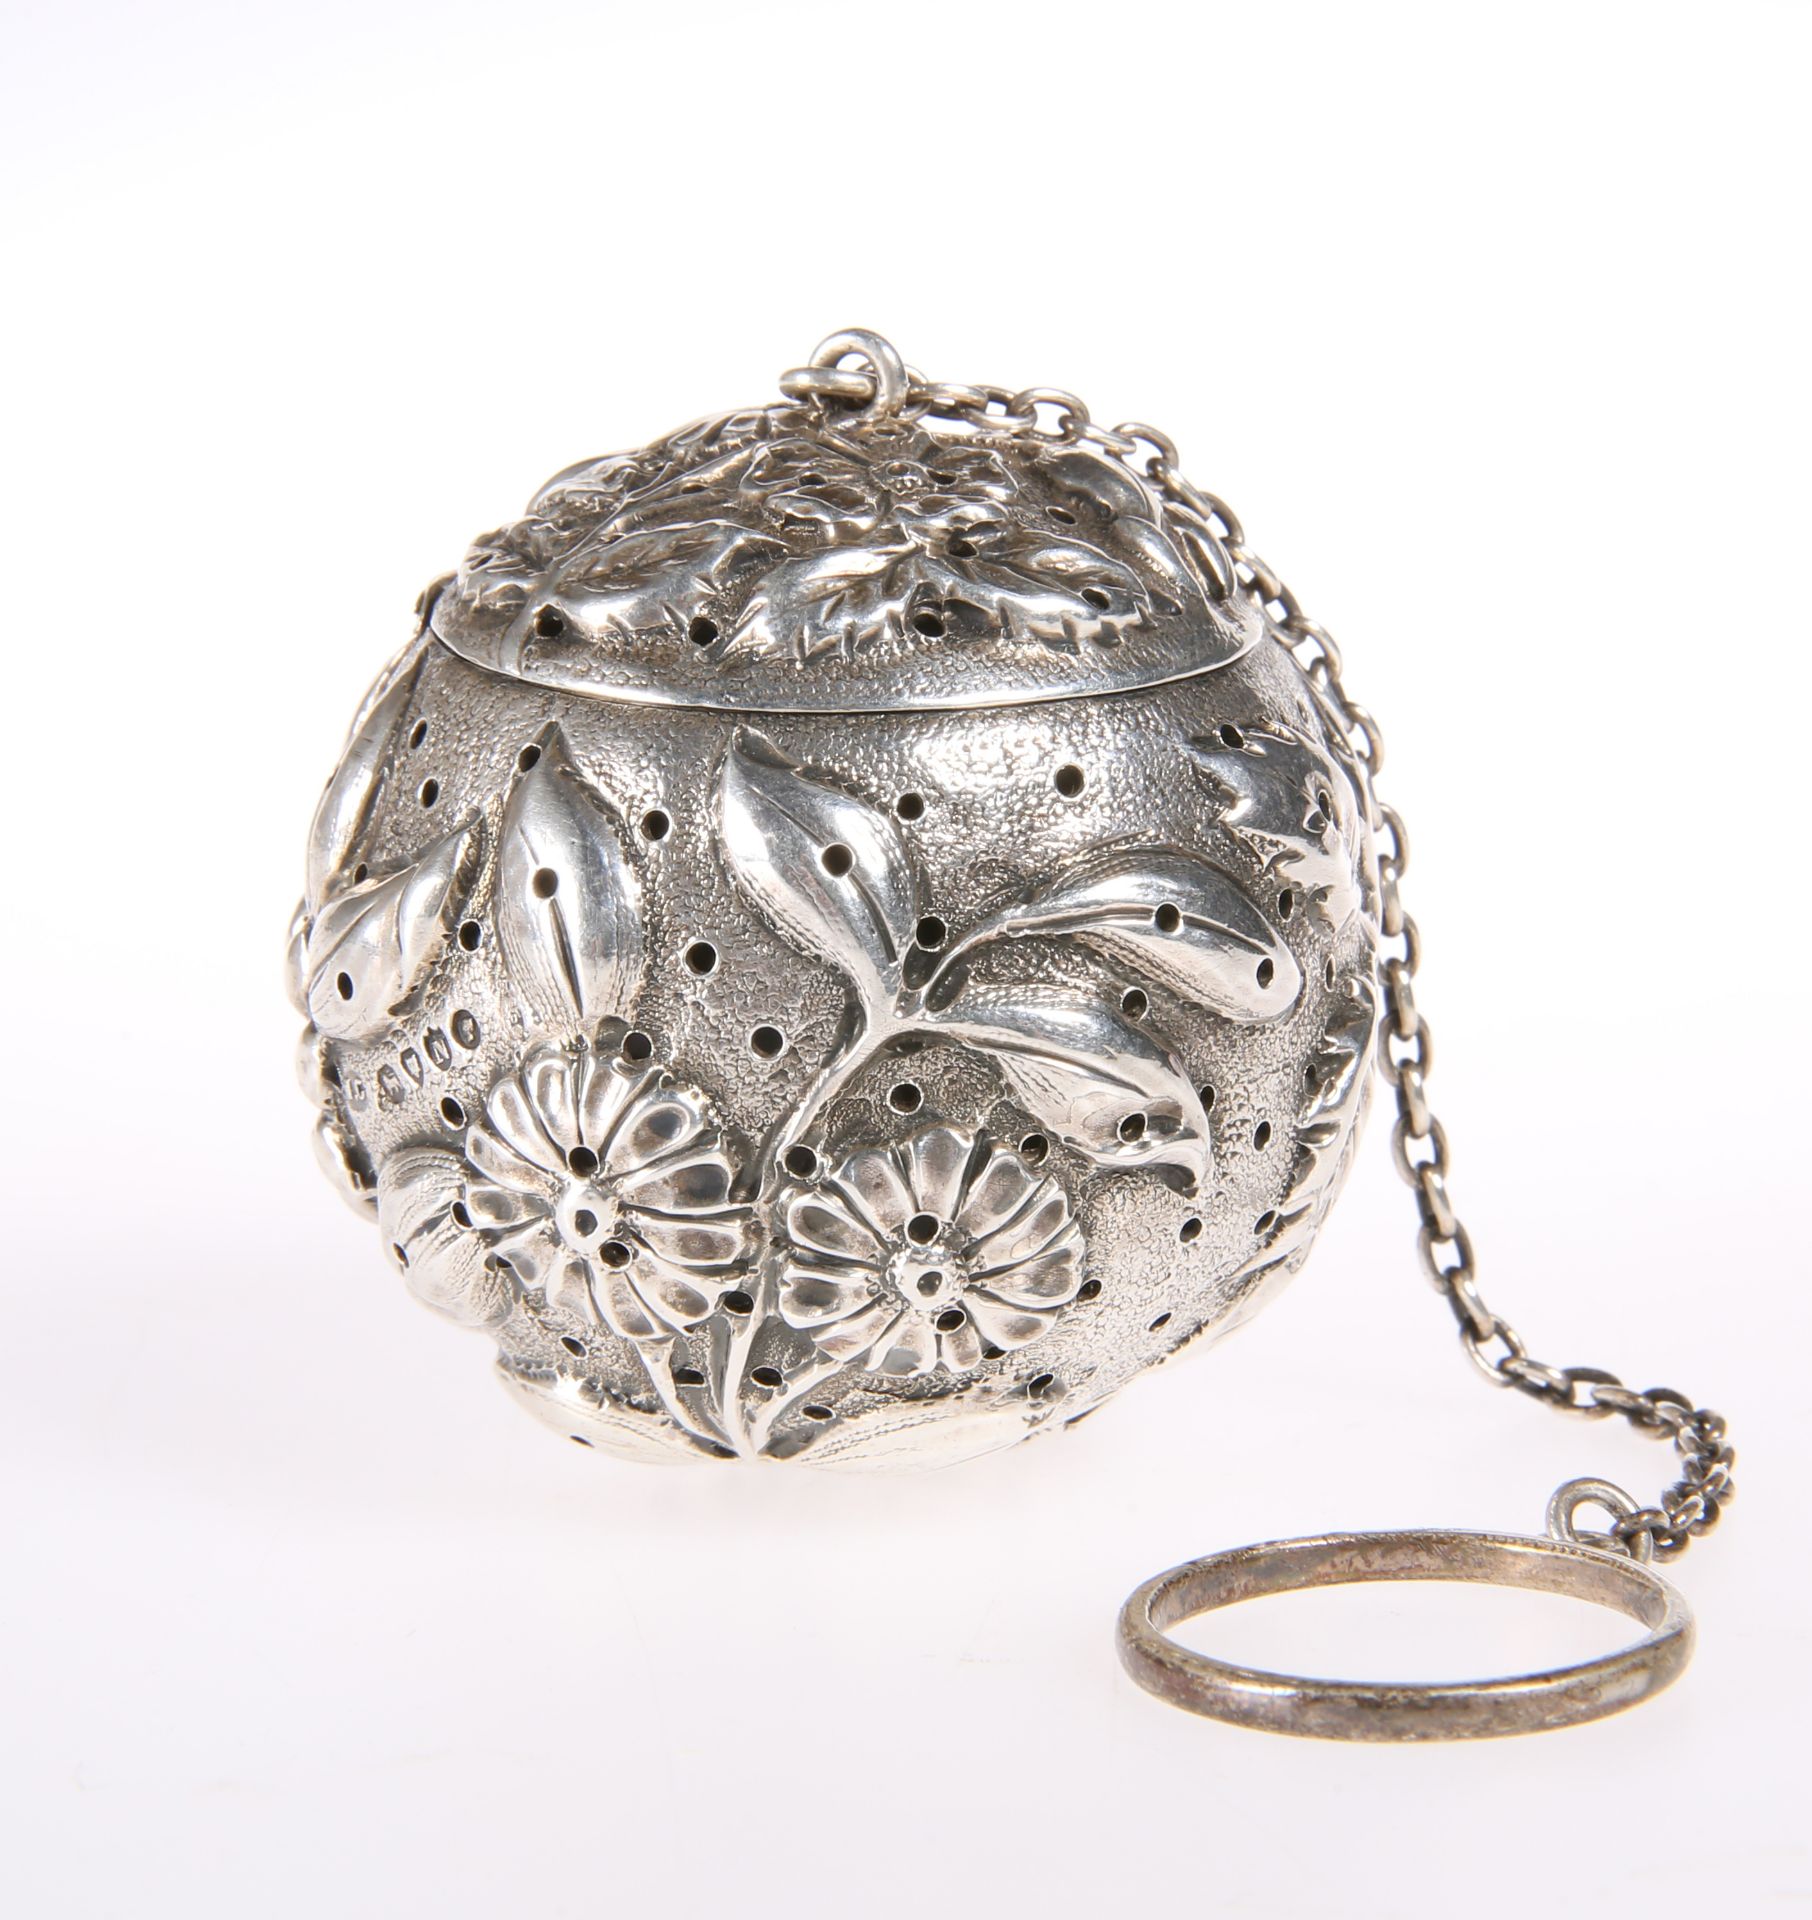 A VICTORIAN SILVER TEA INFUSER, by William Comyns & Sons, London 1888, spherical with hinged